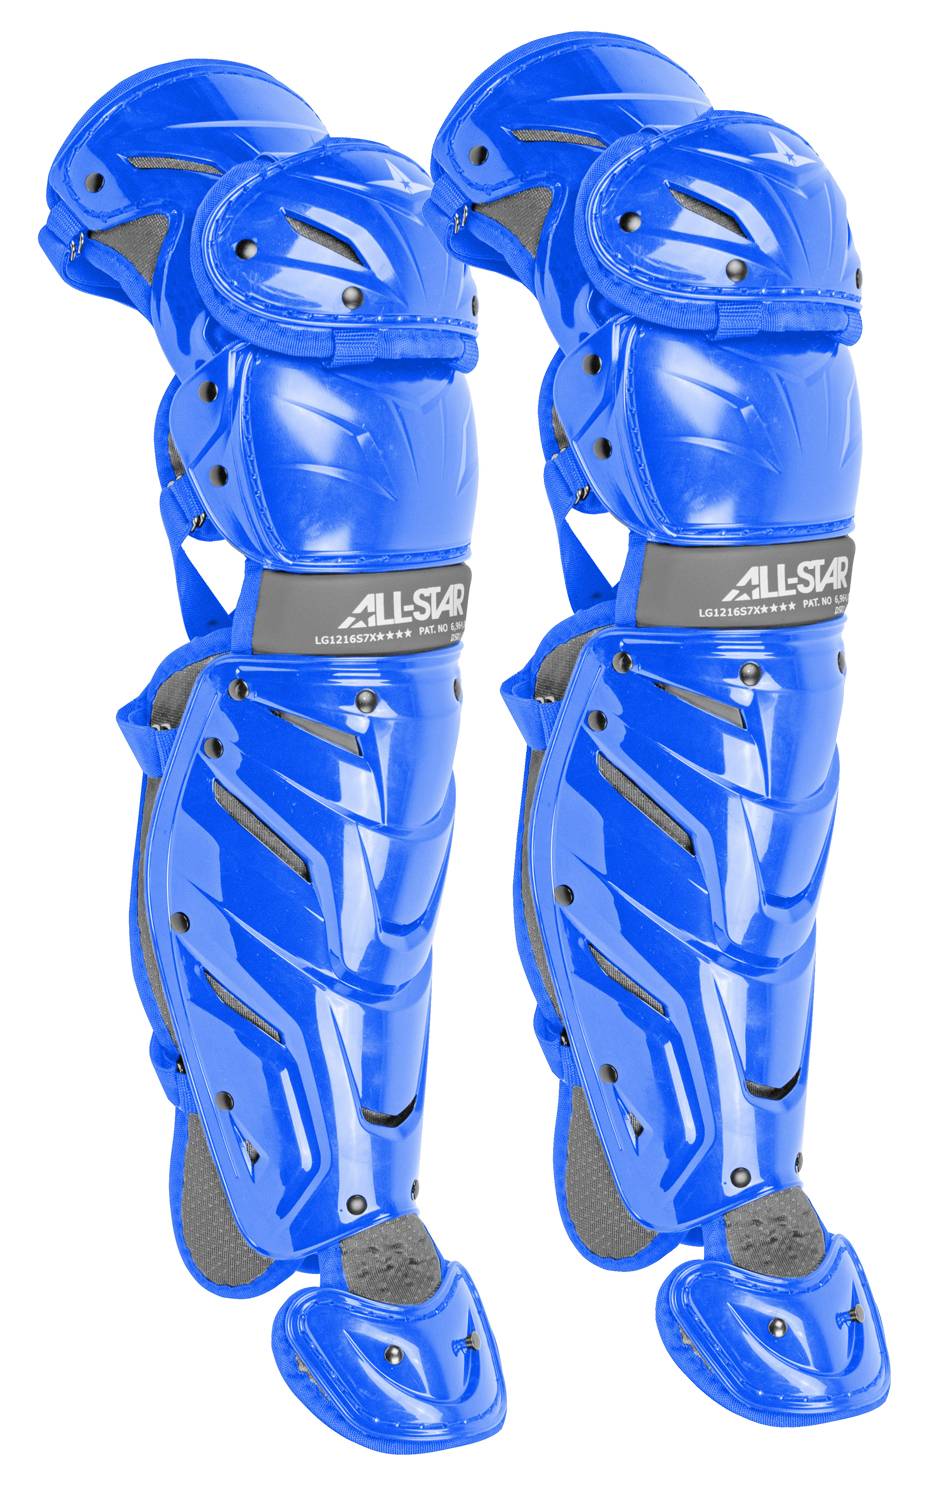 All-Star System 7 9-12 Axis Baseball Catcher's Leg Guards 13.5" 